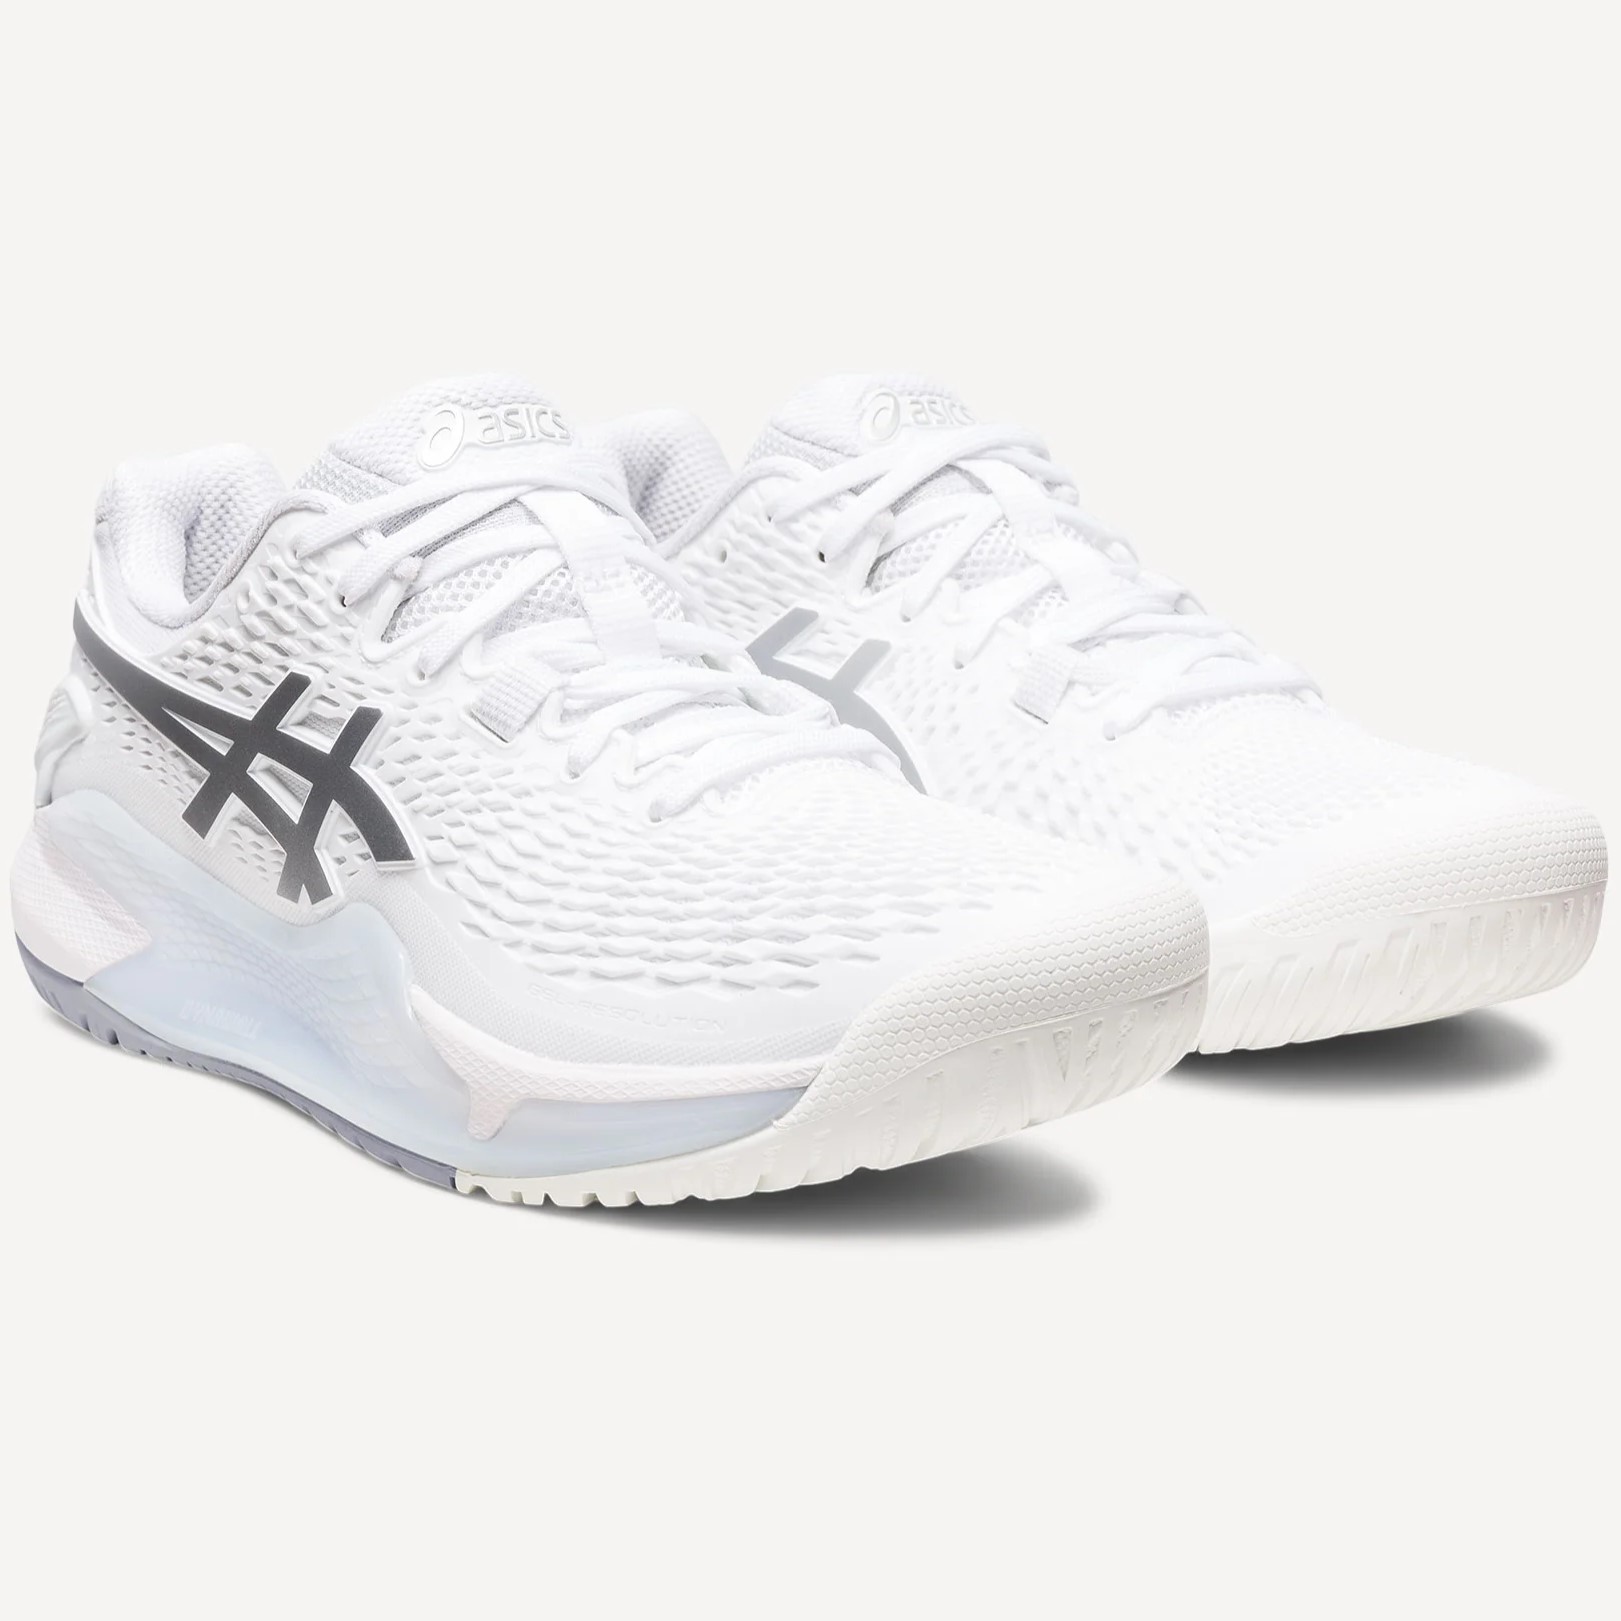 GIÀY CHAY BỘ ASICS NỮ GEL-RESOLUTION 9 WOMENS TENNIS SHOES WHITE PURE SILVER 1042A208-100 11